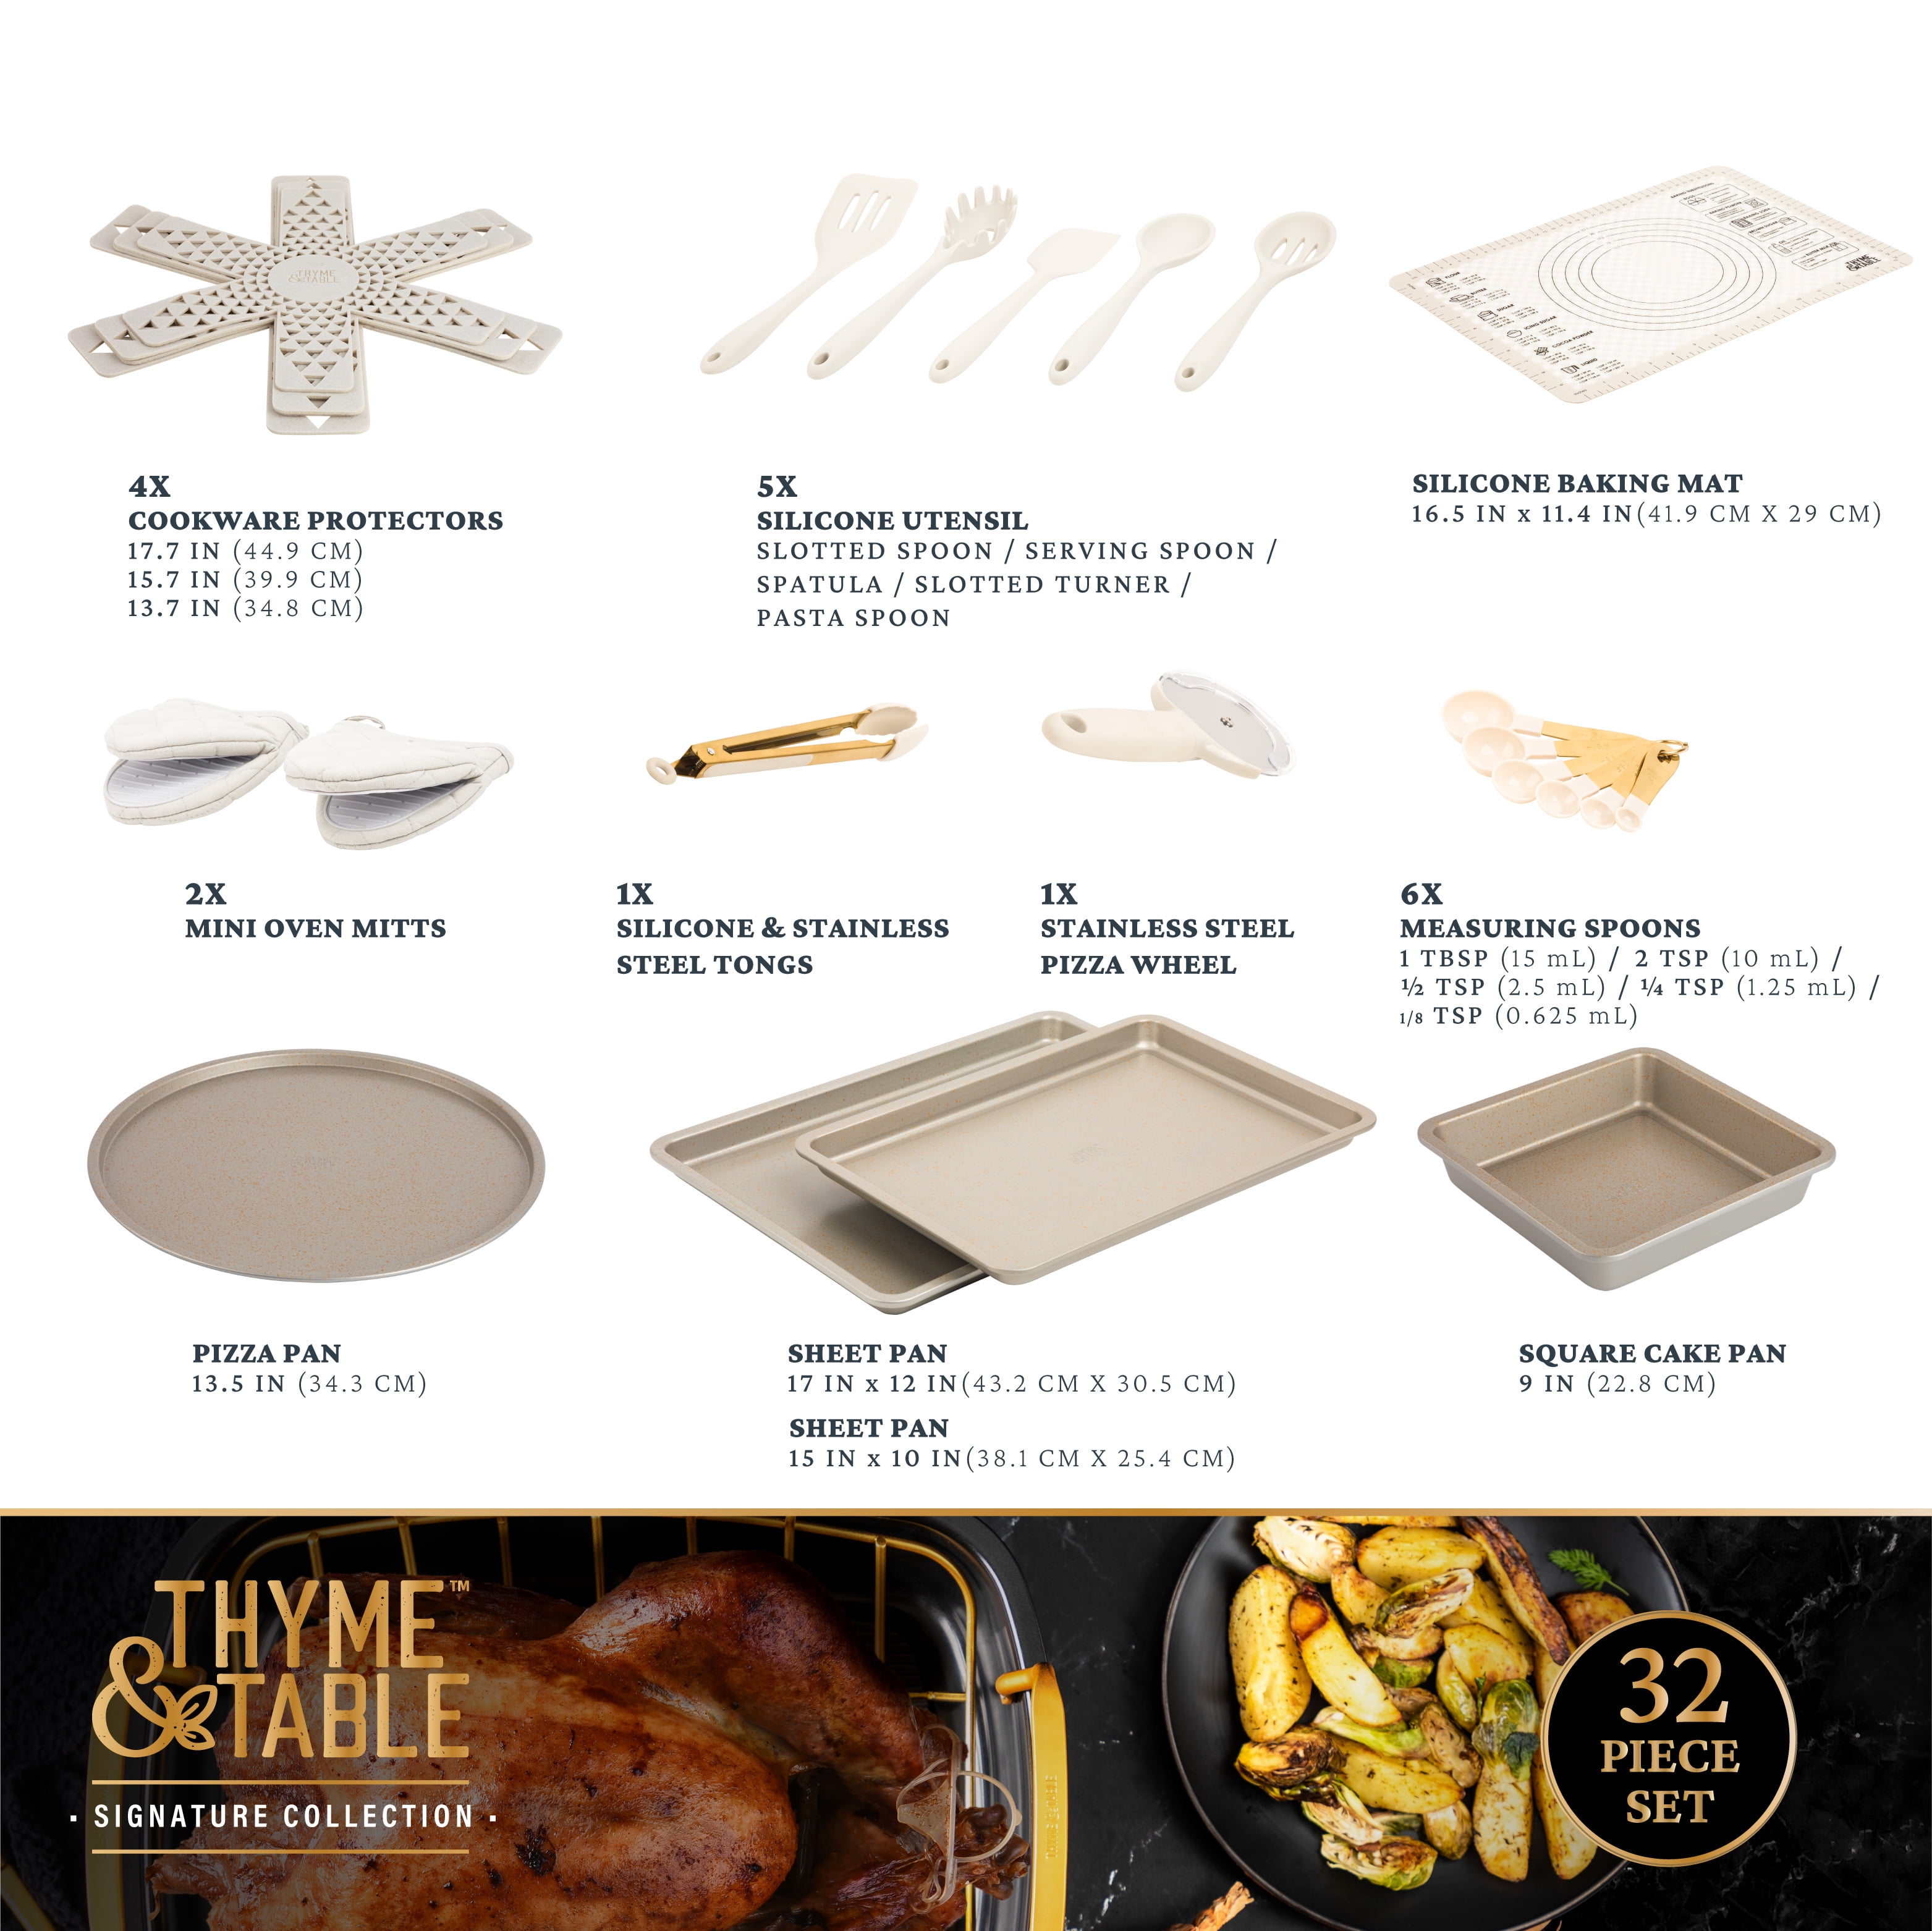 Thyme & Table 32-Piece Cookware & Bakeware Non-Stick Set 🔗 in  @savewithfelix under Latest Deals 🚨 GET DEALS FASTER 🚨 🔔 Turn on…